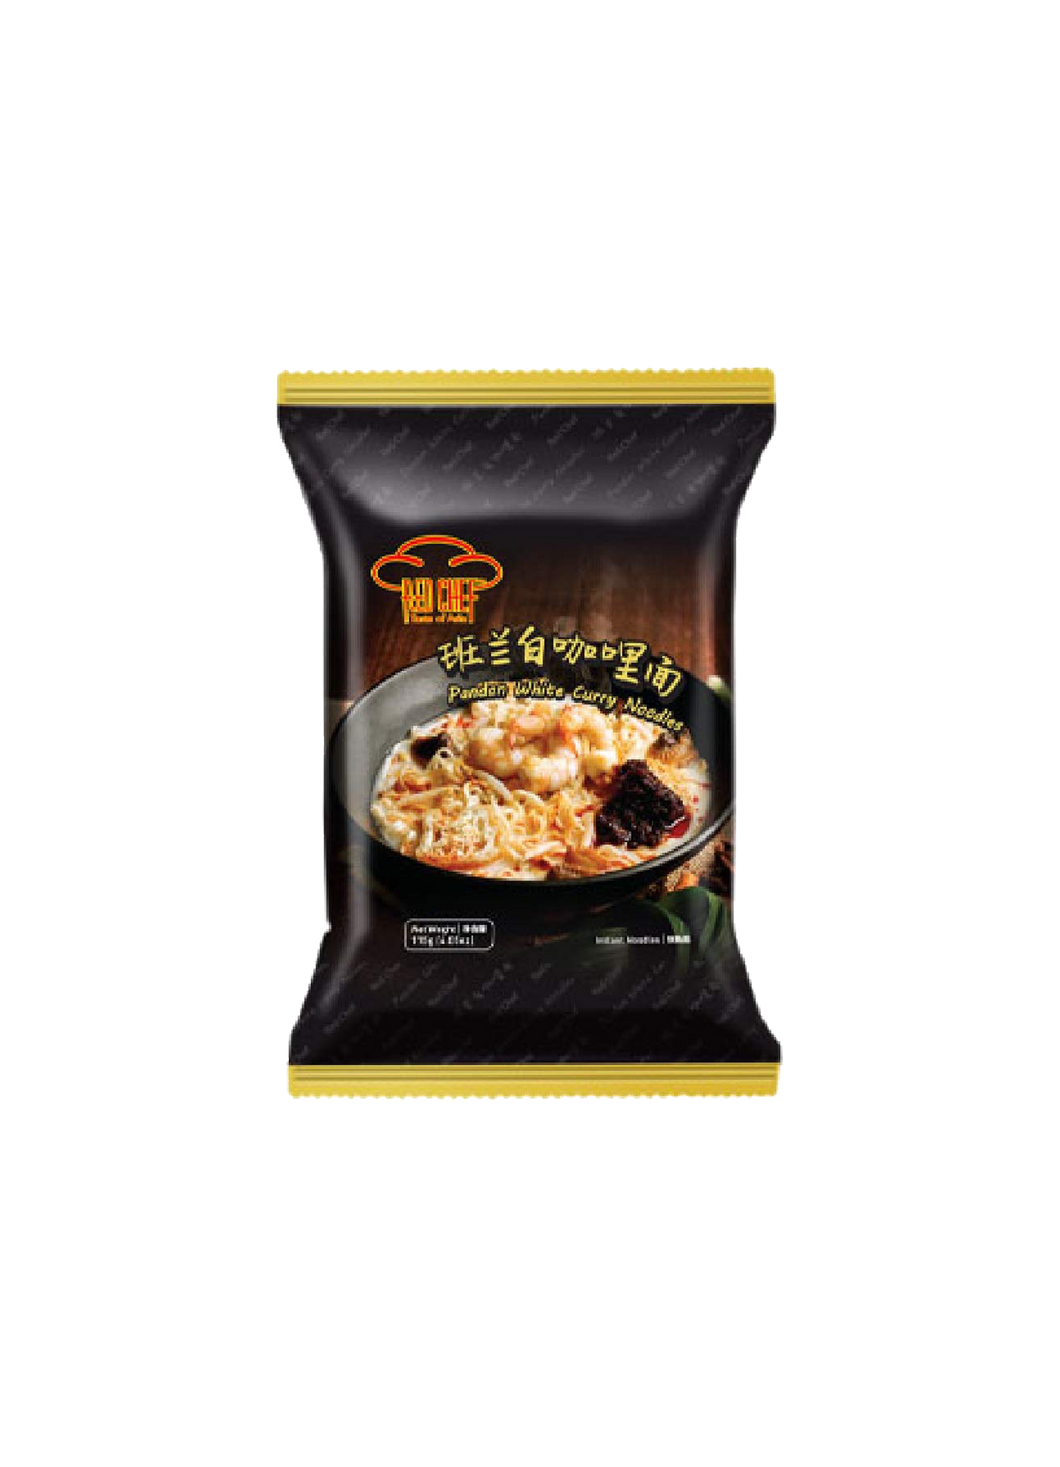 Red Chef Pandan White Curry Noodles 115g